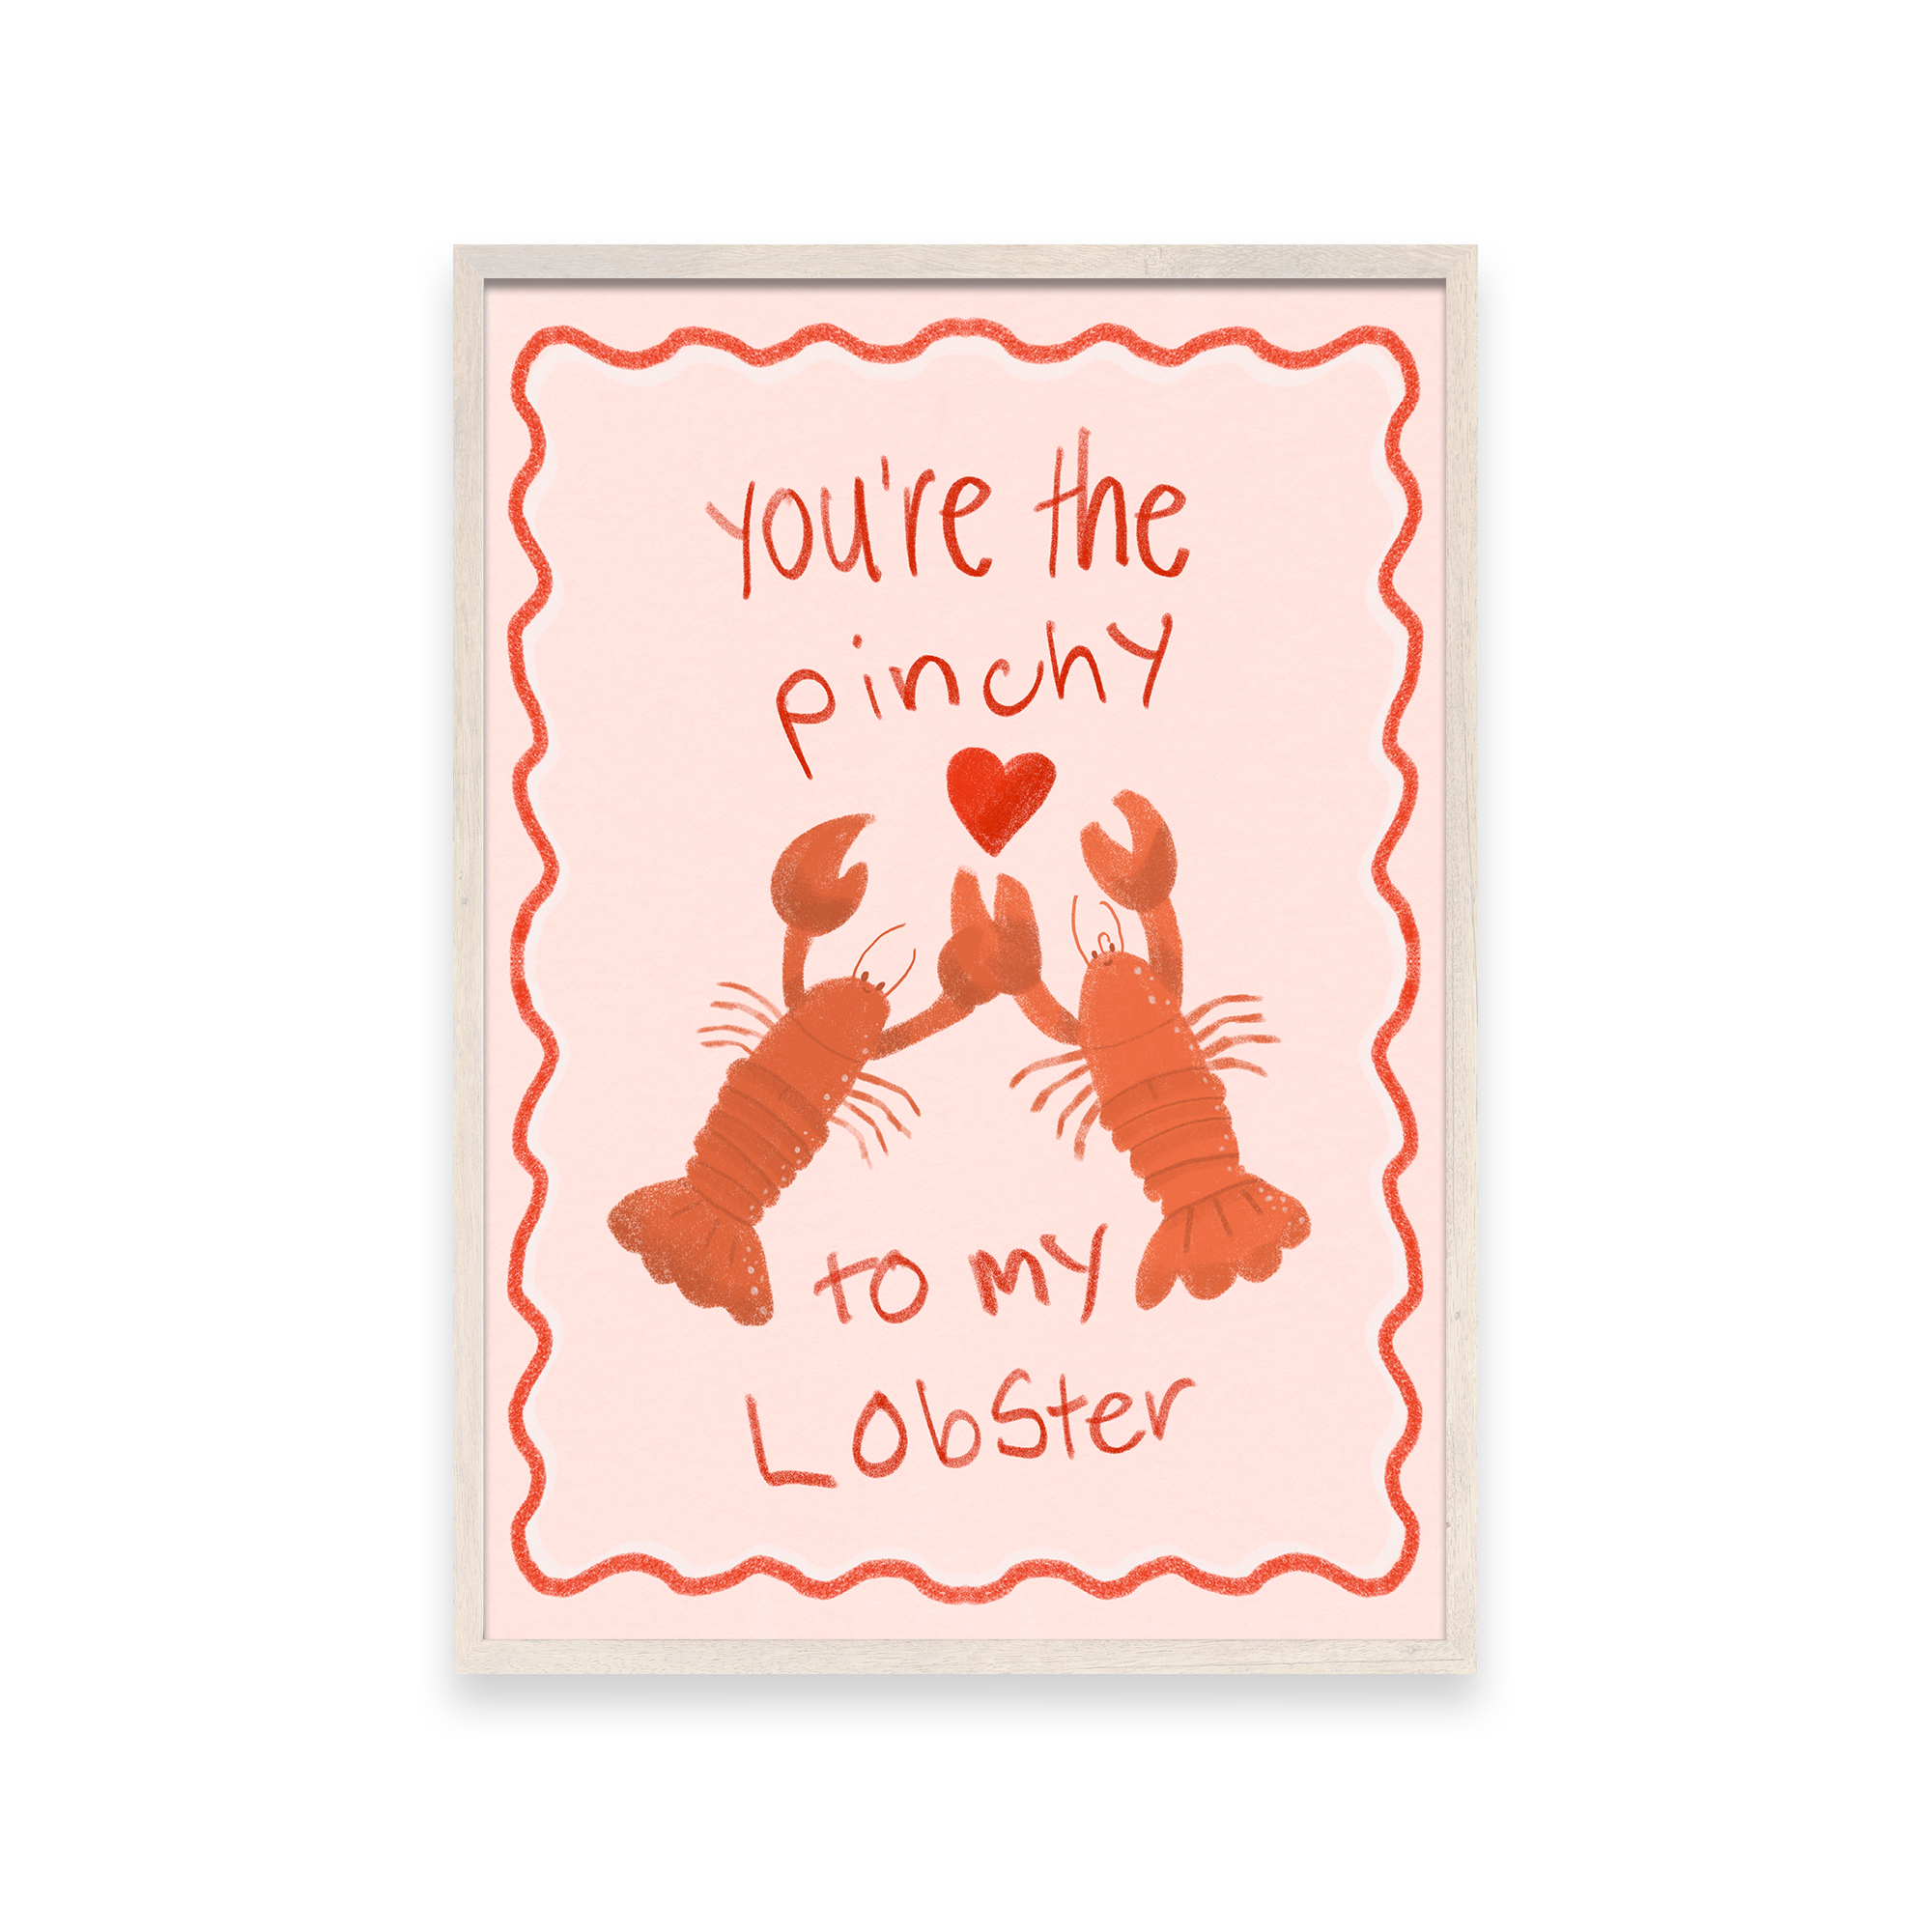 Illustration of two orange lobsters holding claws with a heart and text "You're the Pinchy to my Lobster" on a pink poster with a squiggly red outline.